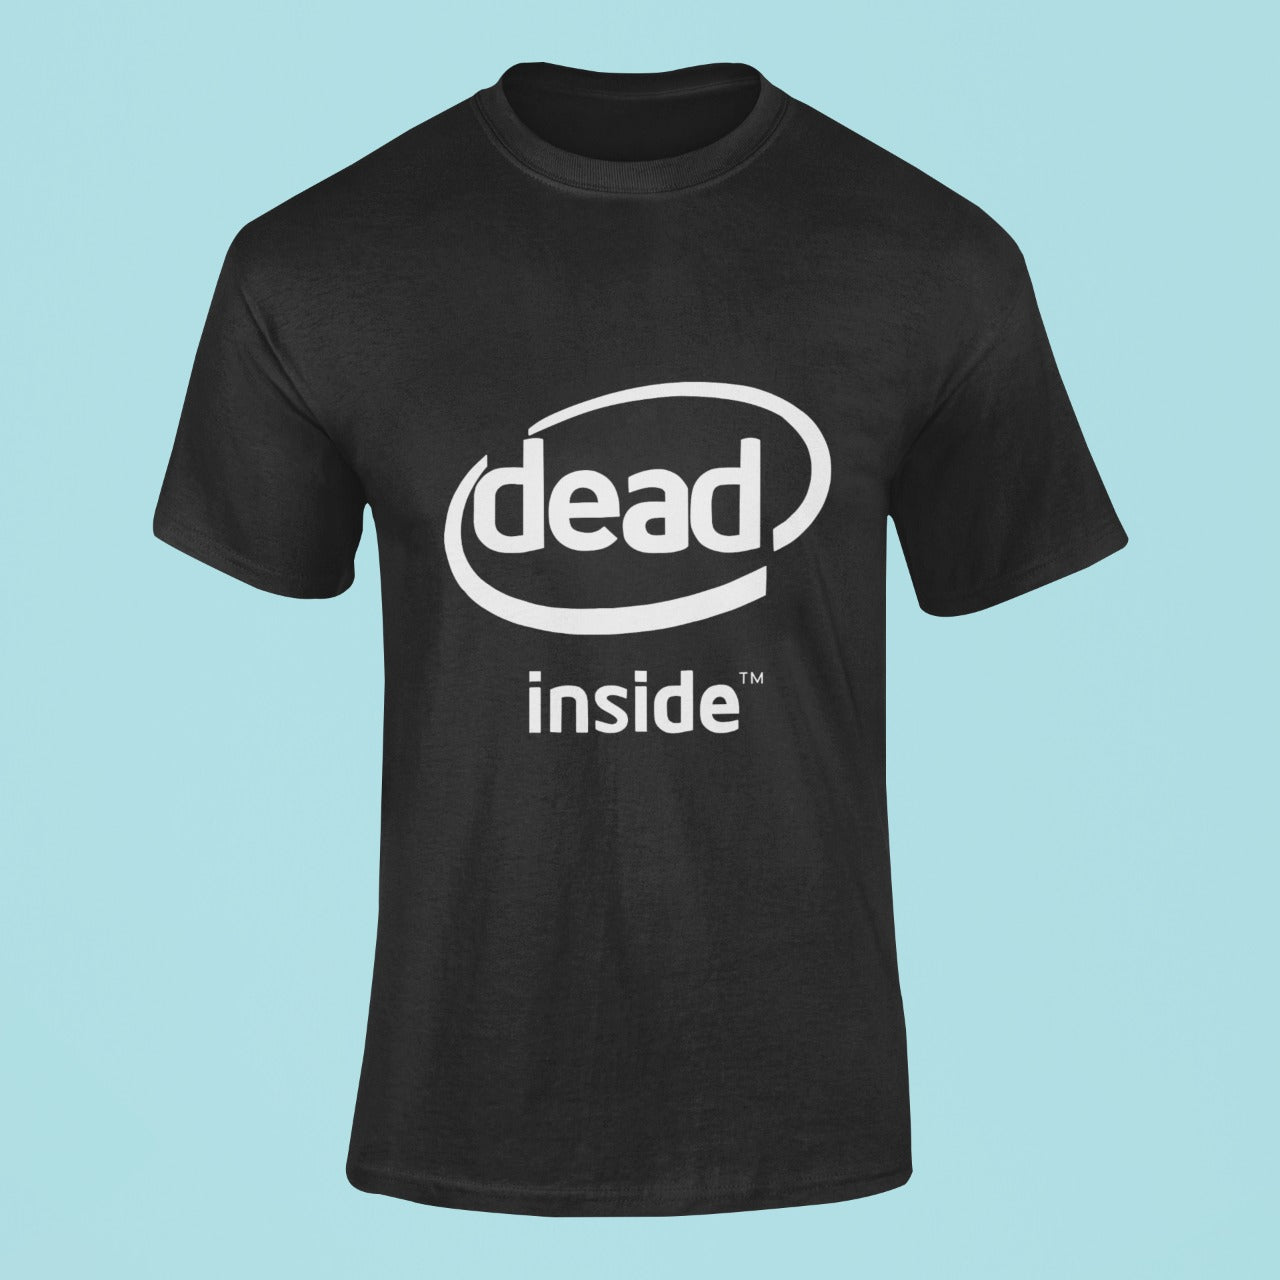 Looking for an edgy and stylish addition to your wardrobe? Our black t-shirt featuring a "Dead Inside" graphic design inspired by the Intel Inside logo is the perfect choice. Made with high-quality materials, it's perfect for making a statement. Order yours today and step up your style game with this bold and unique design.